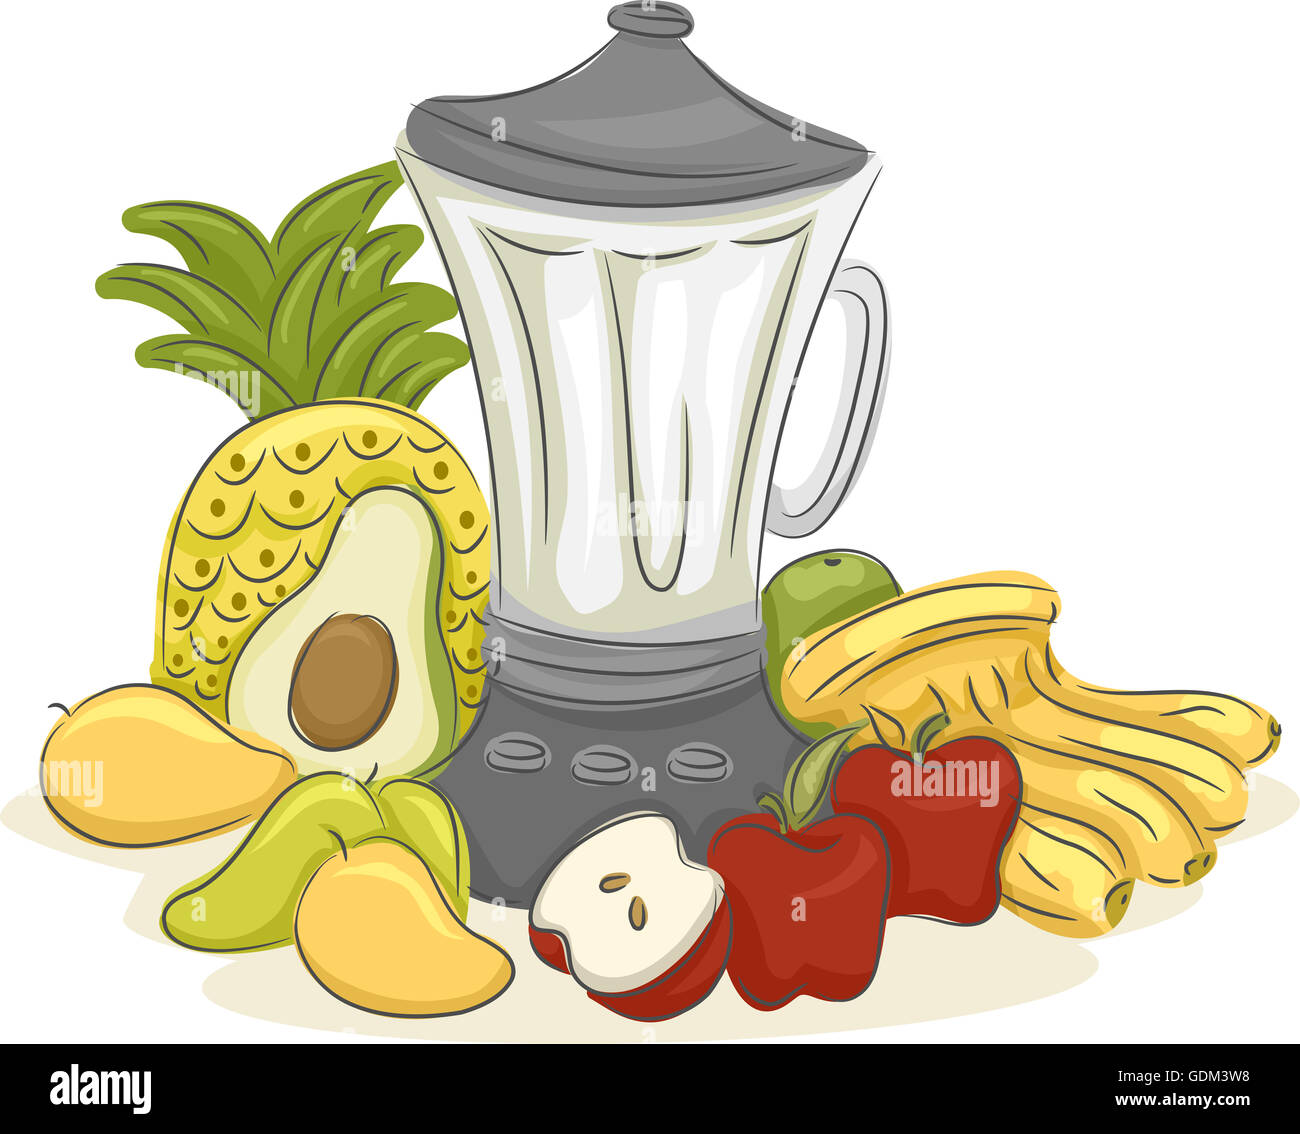 Illustration of an Electric Blender Surrounded by Different Fruits Stock Photo